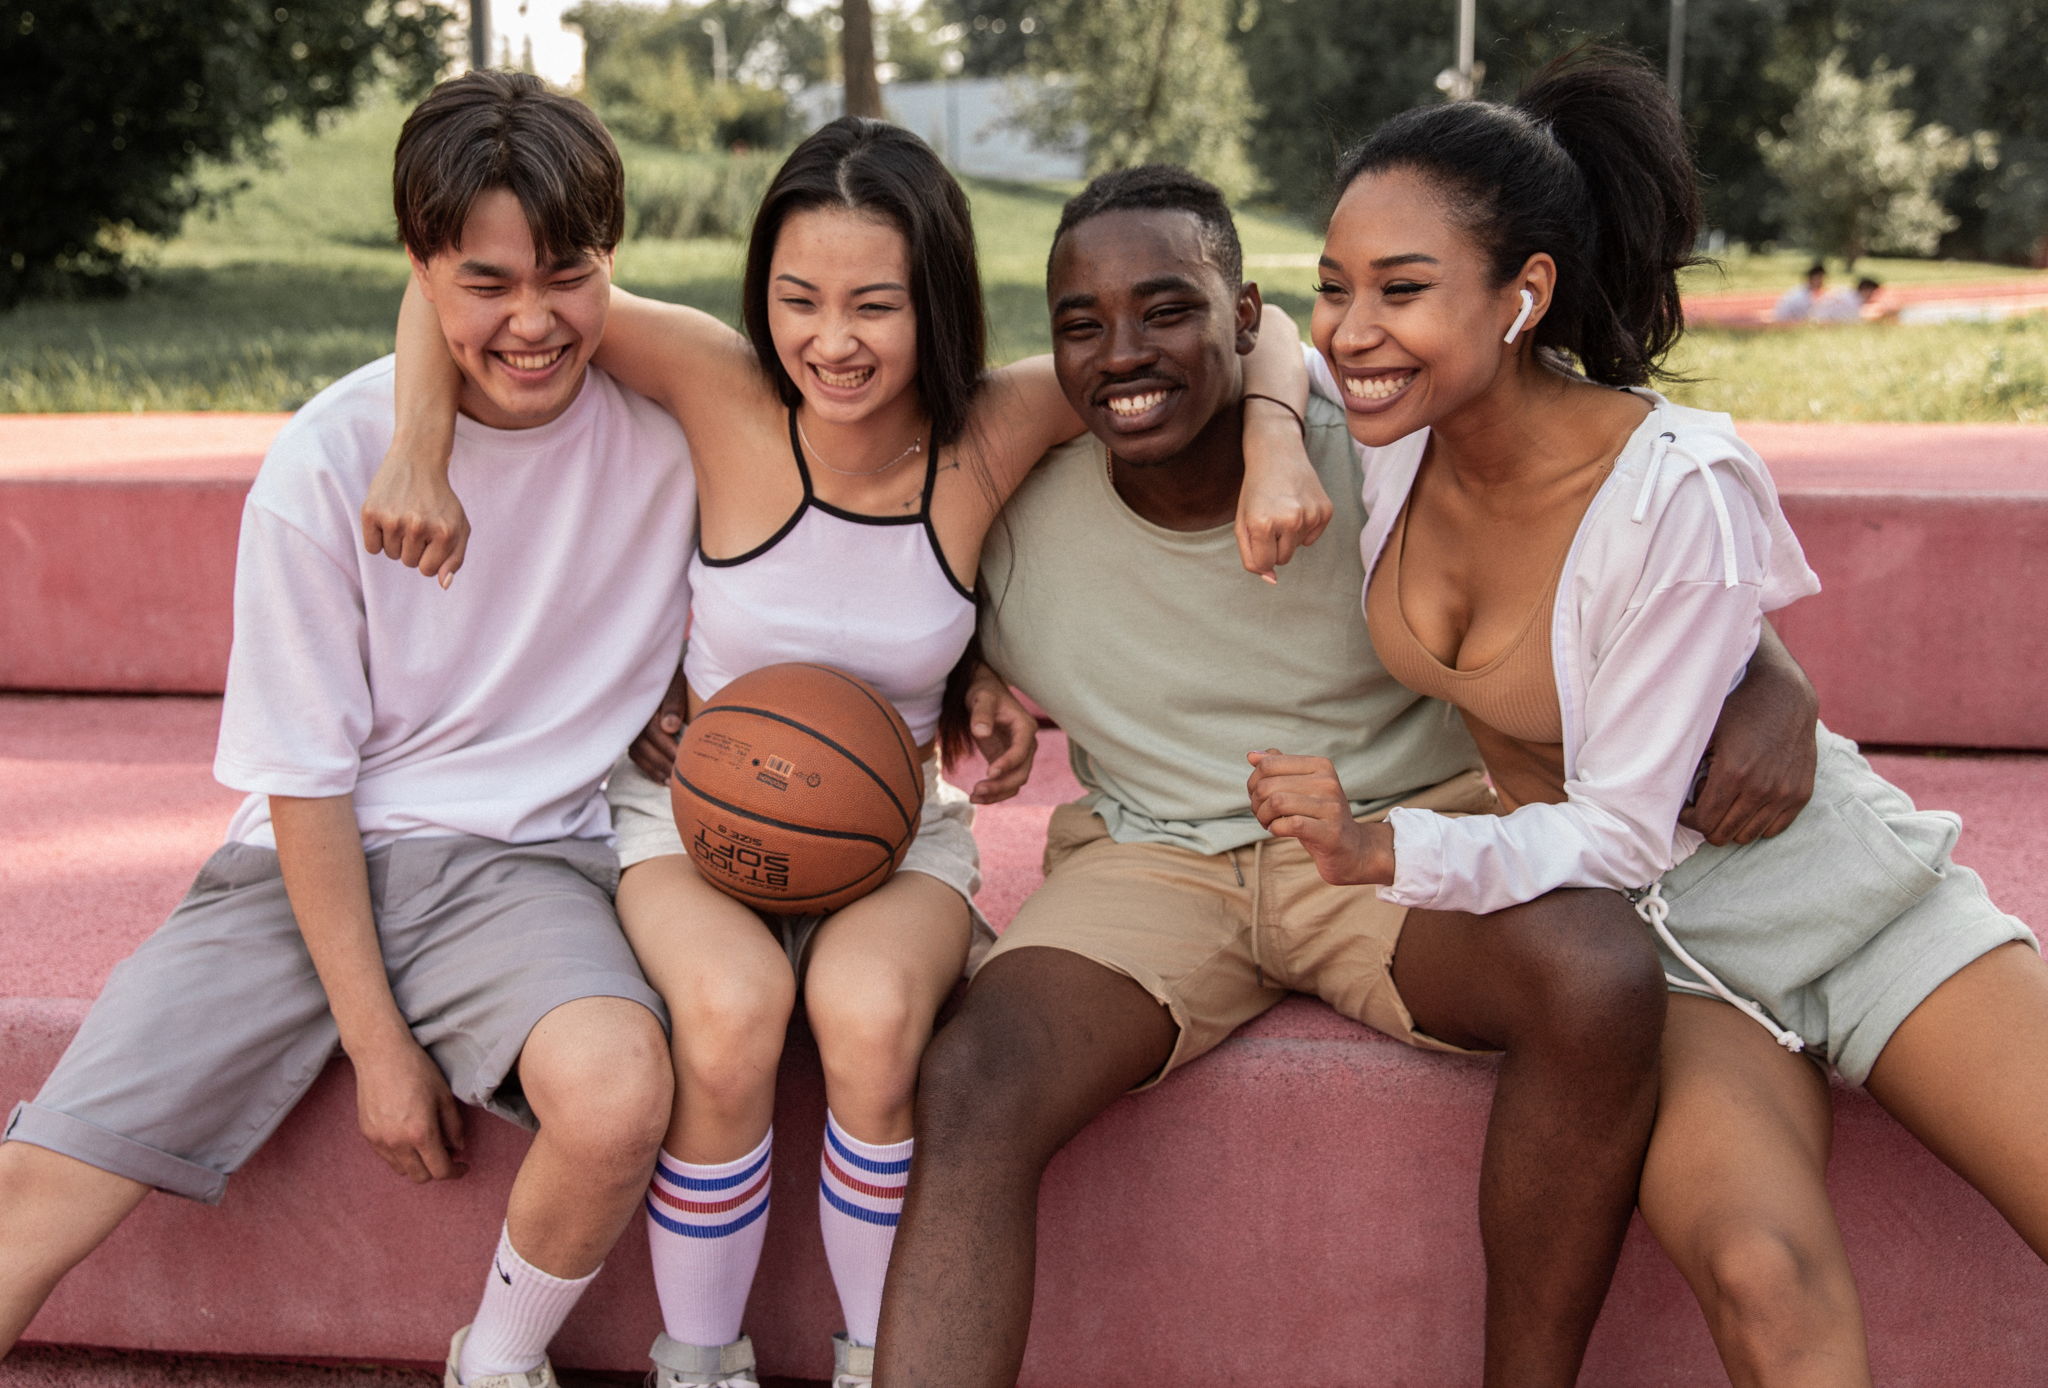 A group of mixed friends sitting together and hugging with sportswear and a basketball.